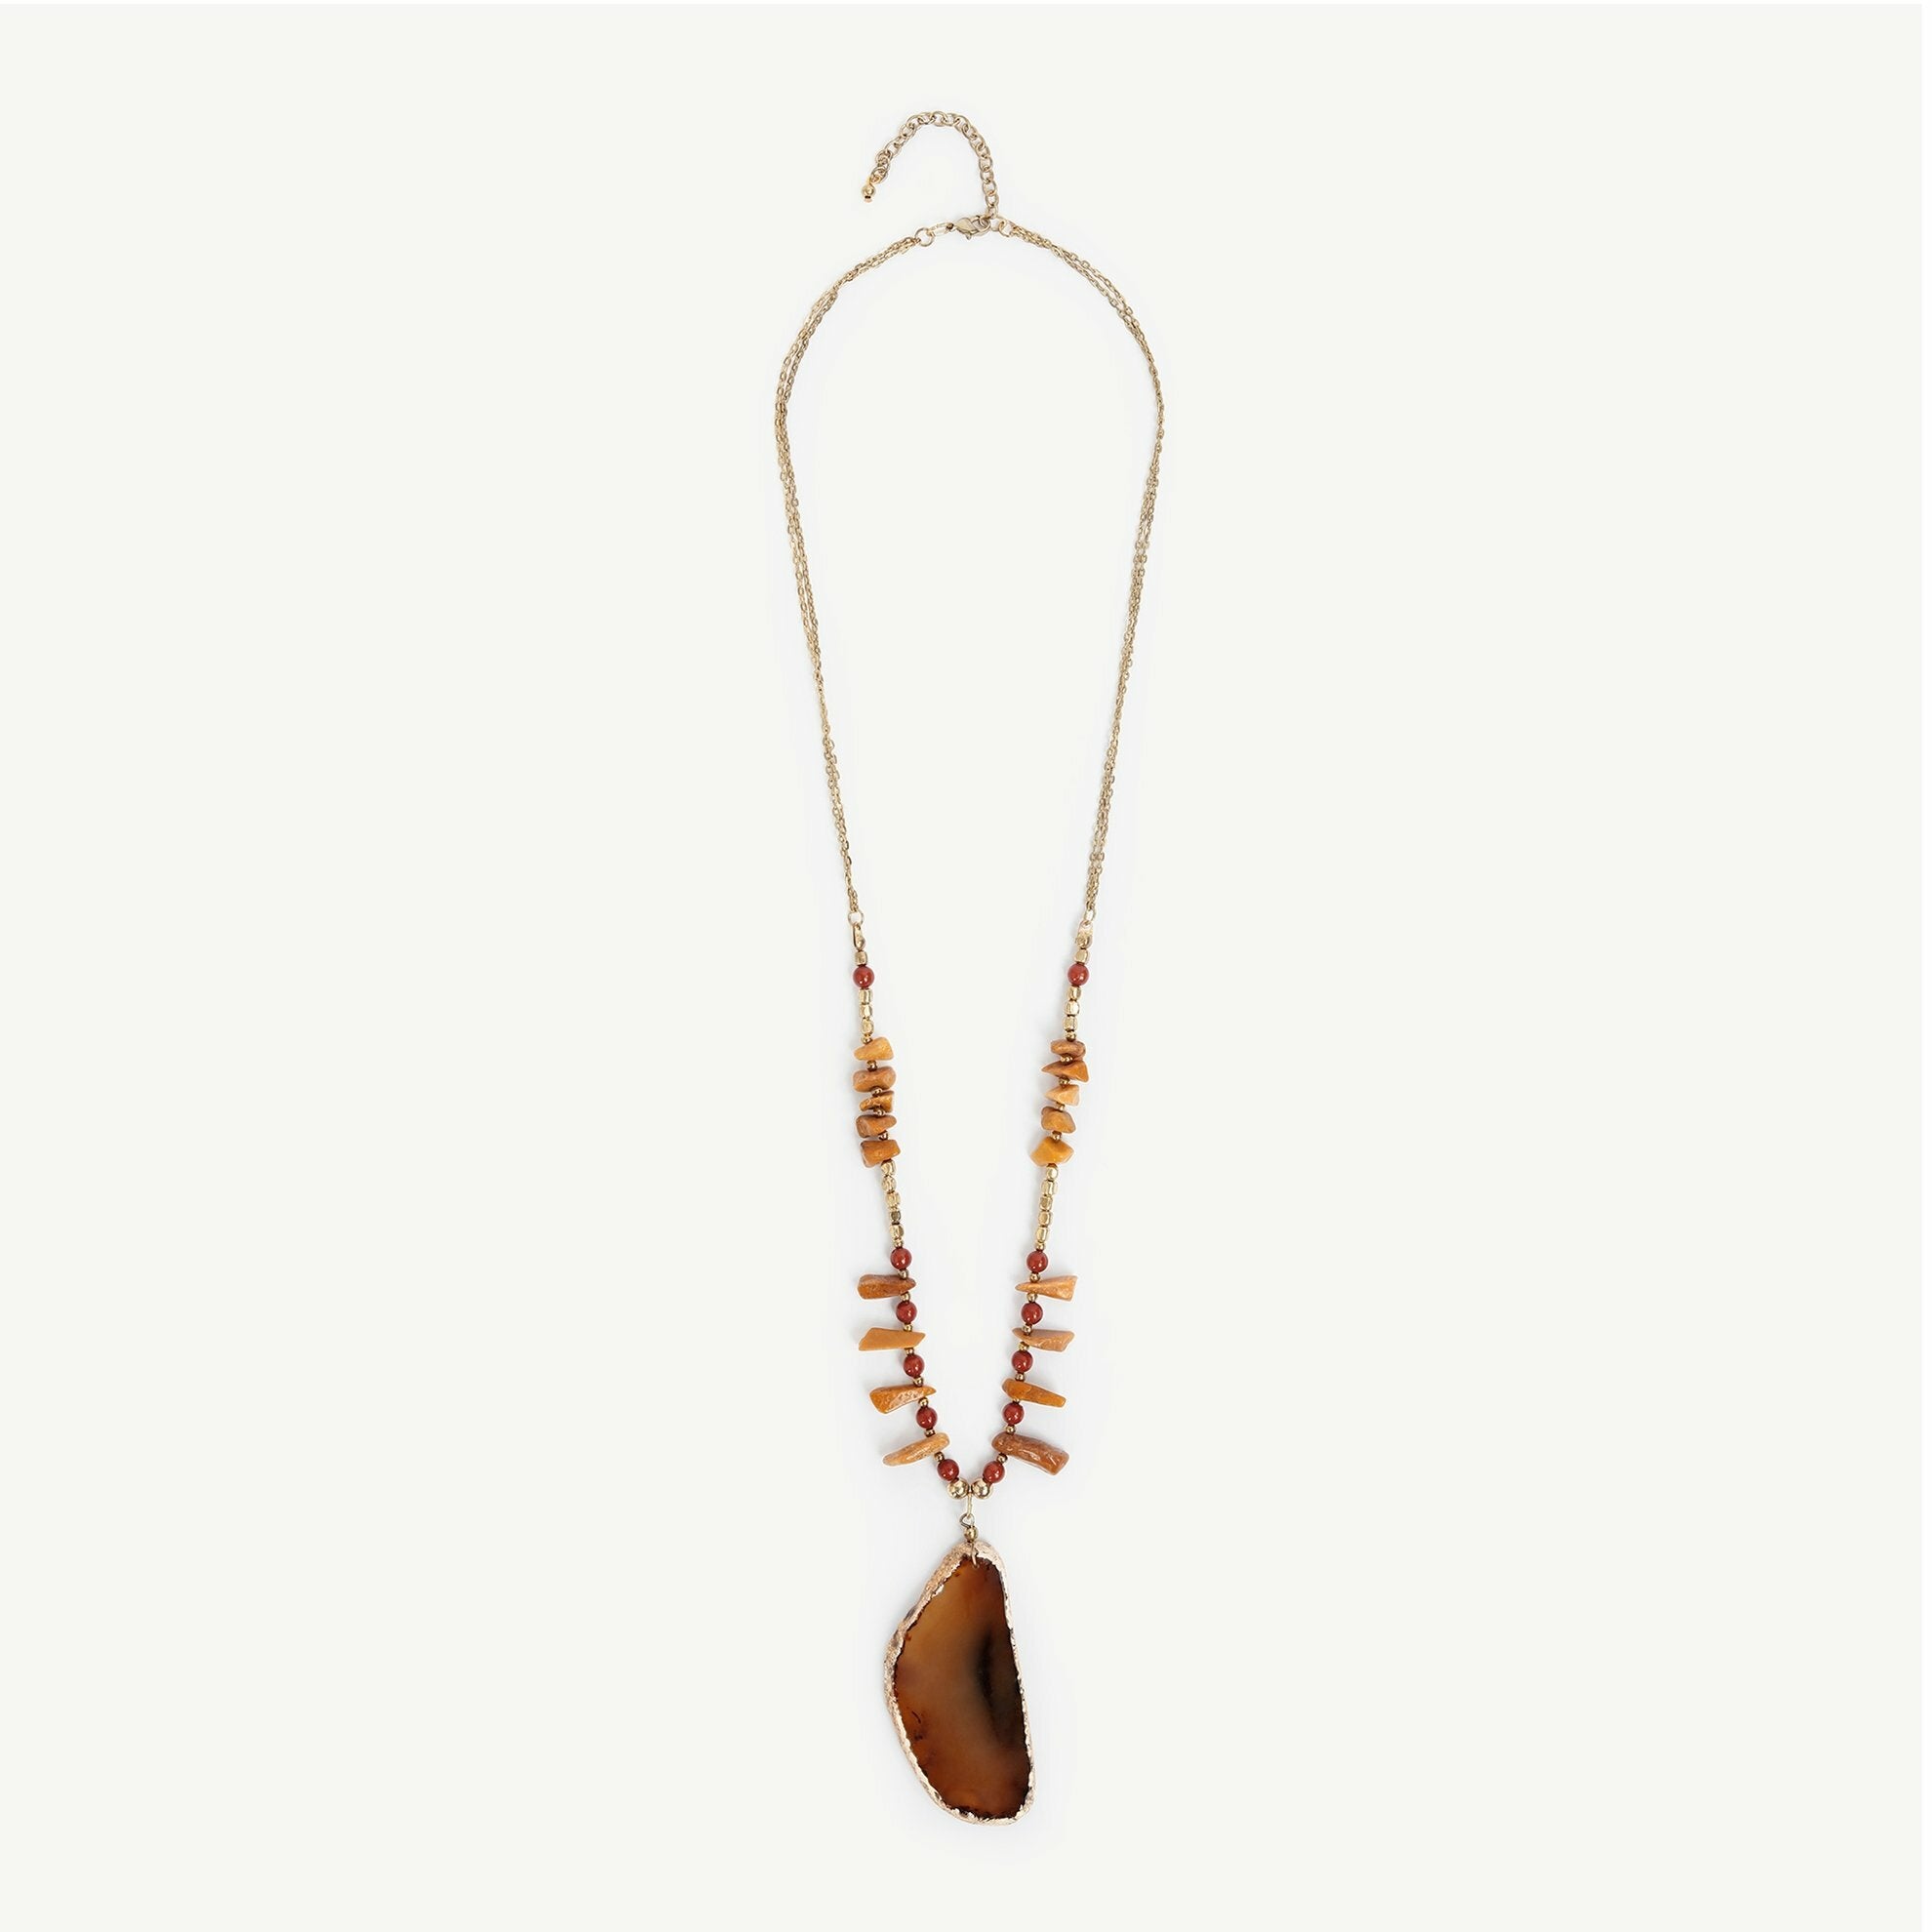 Brown natural stone necklace complete look.